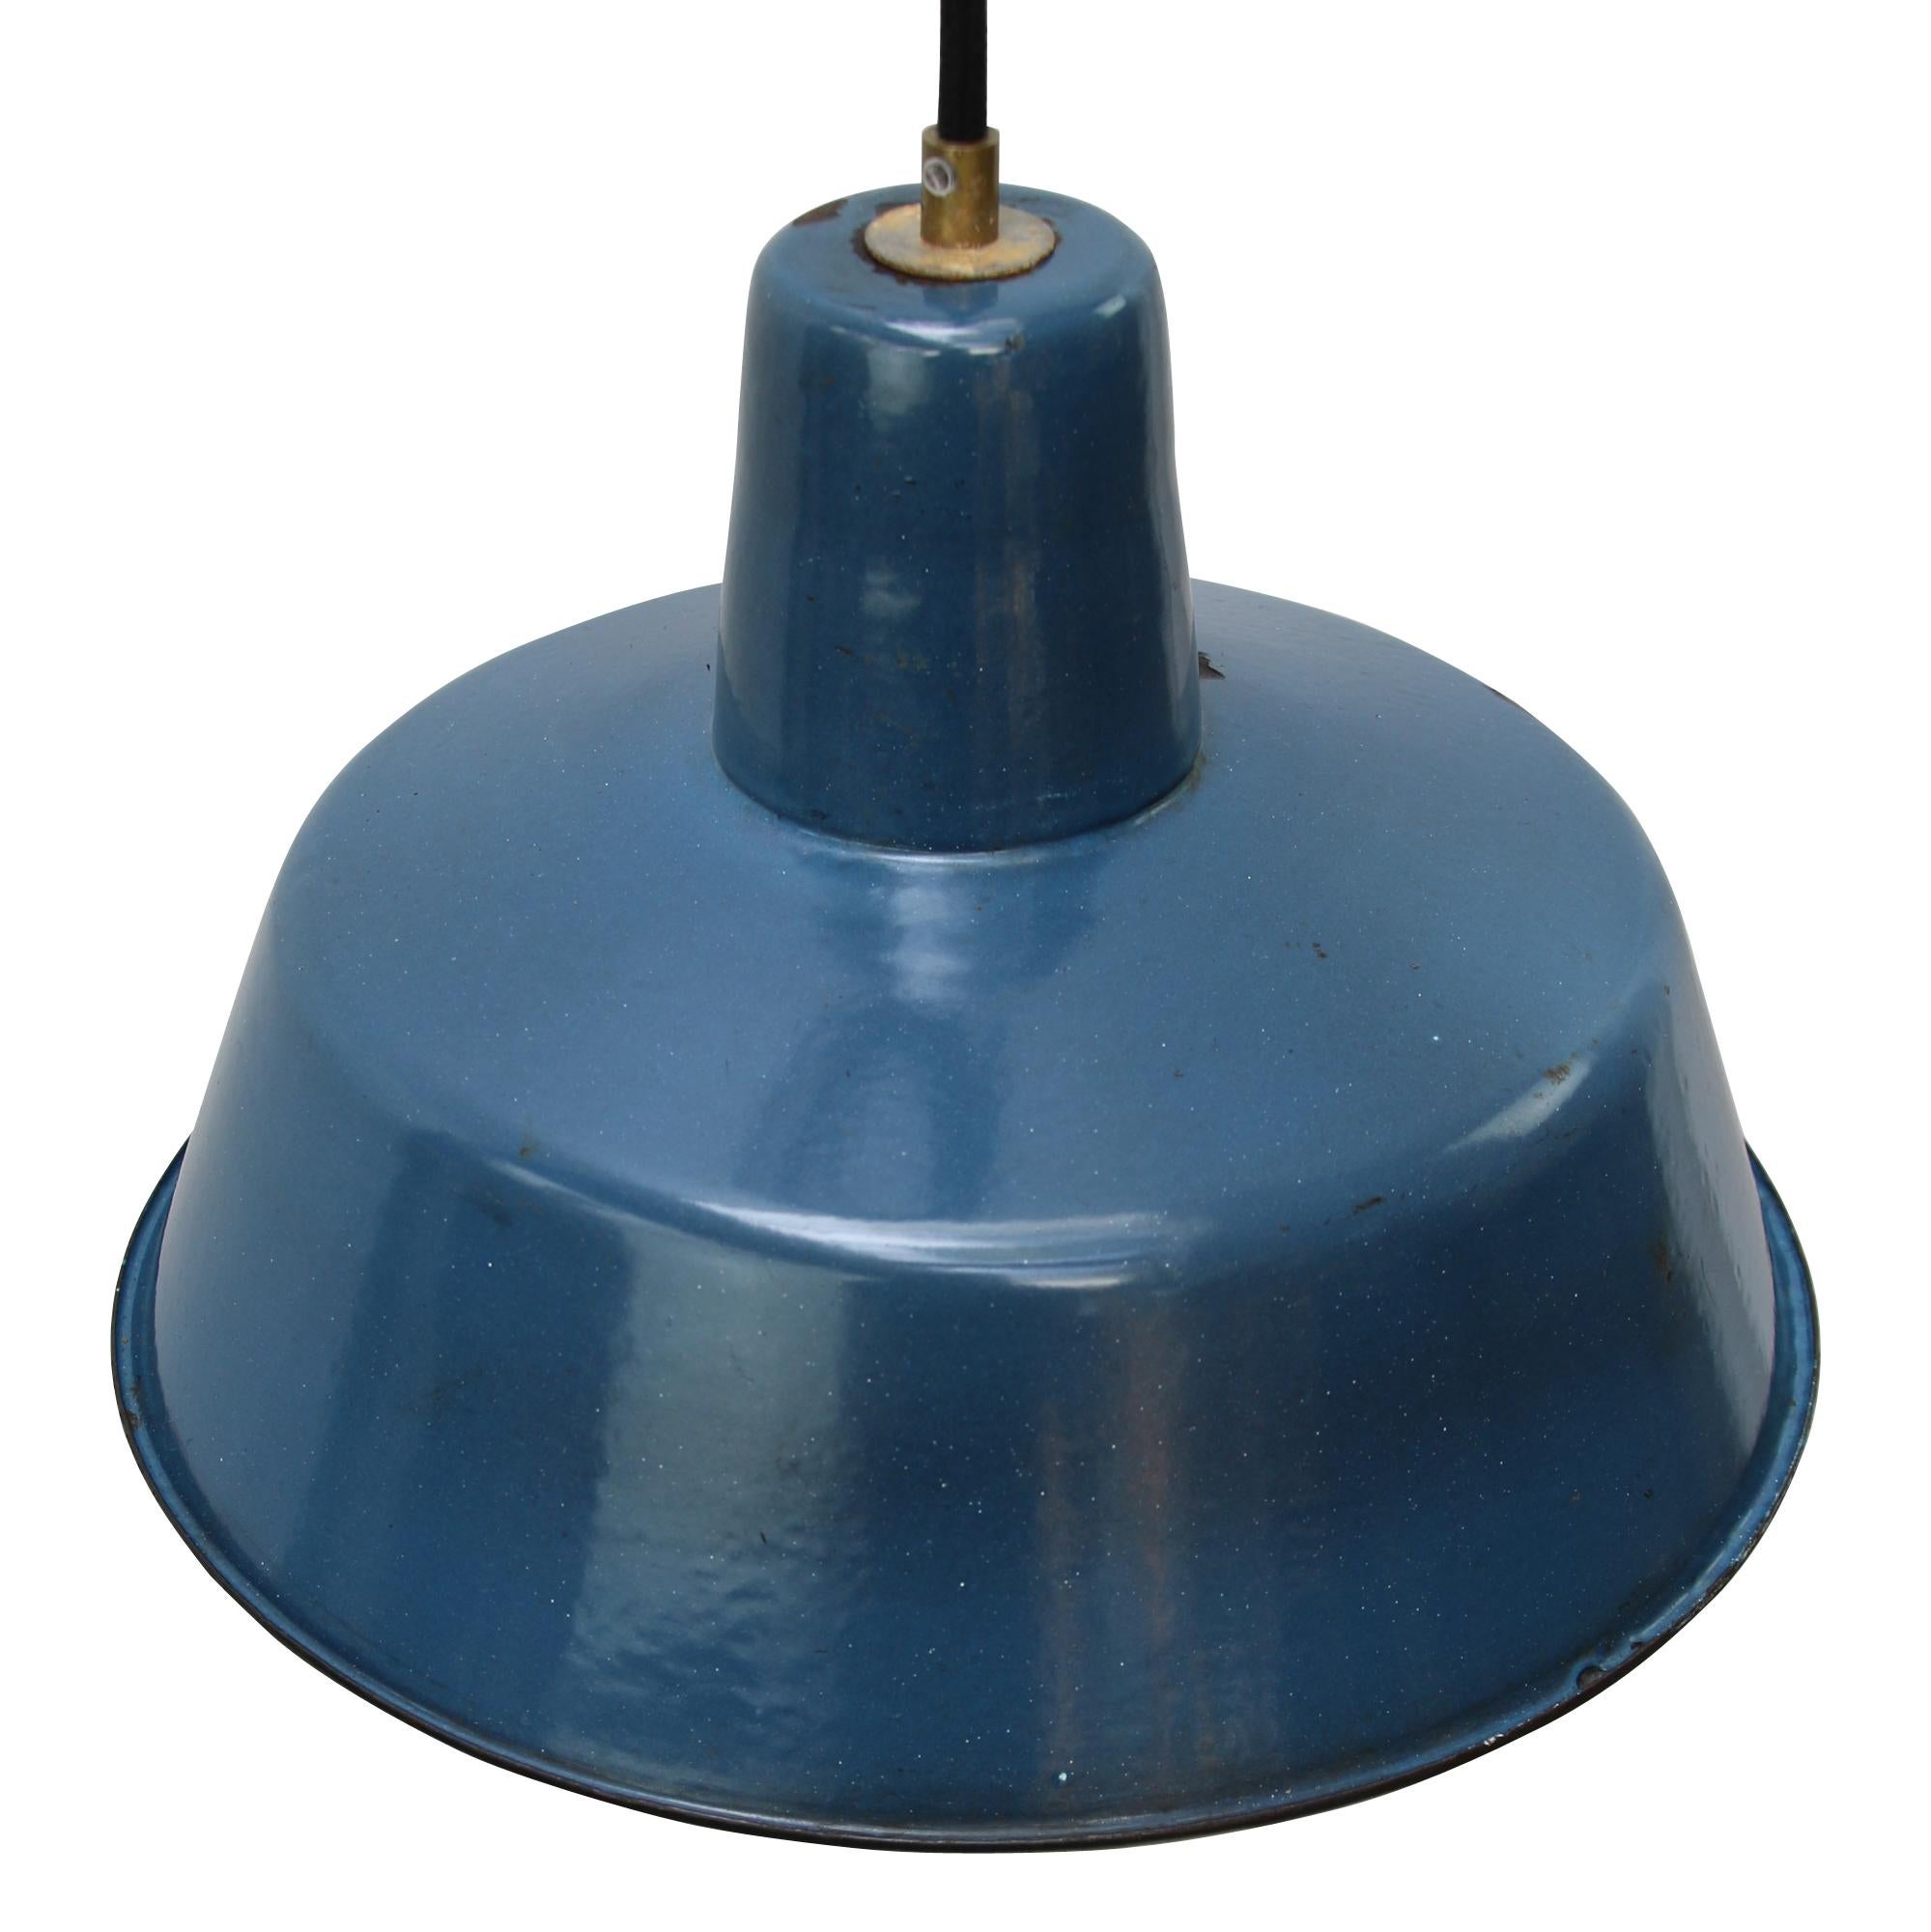 Vintage industrial pendant.
Blue enamel with white interior.

Weight: 1.3 kg / 2.9 lb.

Priced per individual item. All lamps have been made suitable by international standards for incandescent light bulbs, energy-efficient and LED bulbs.